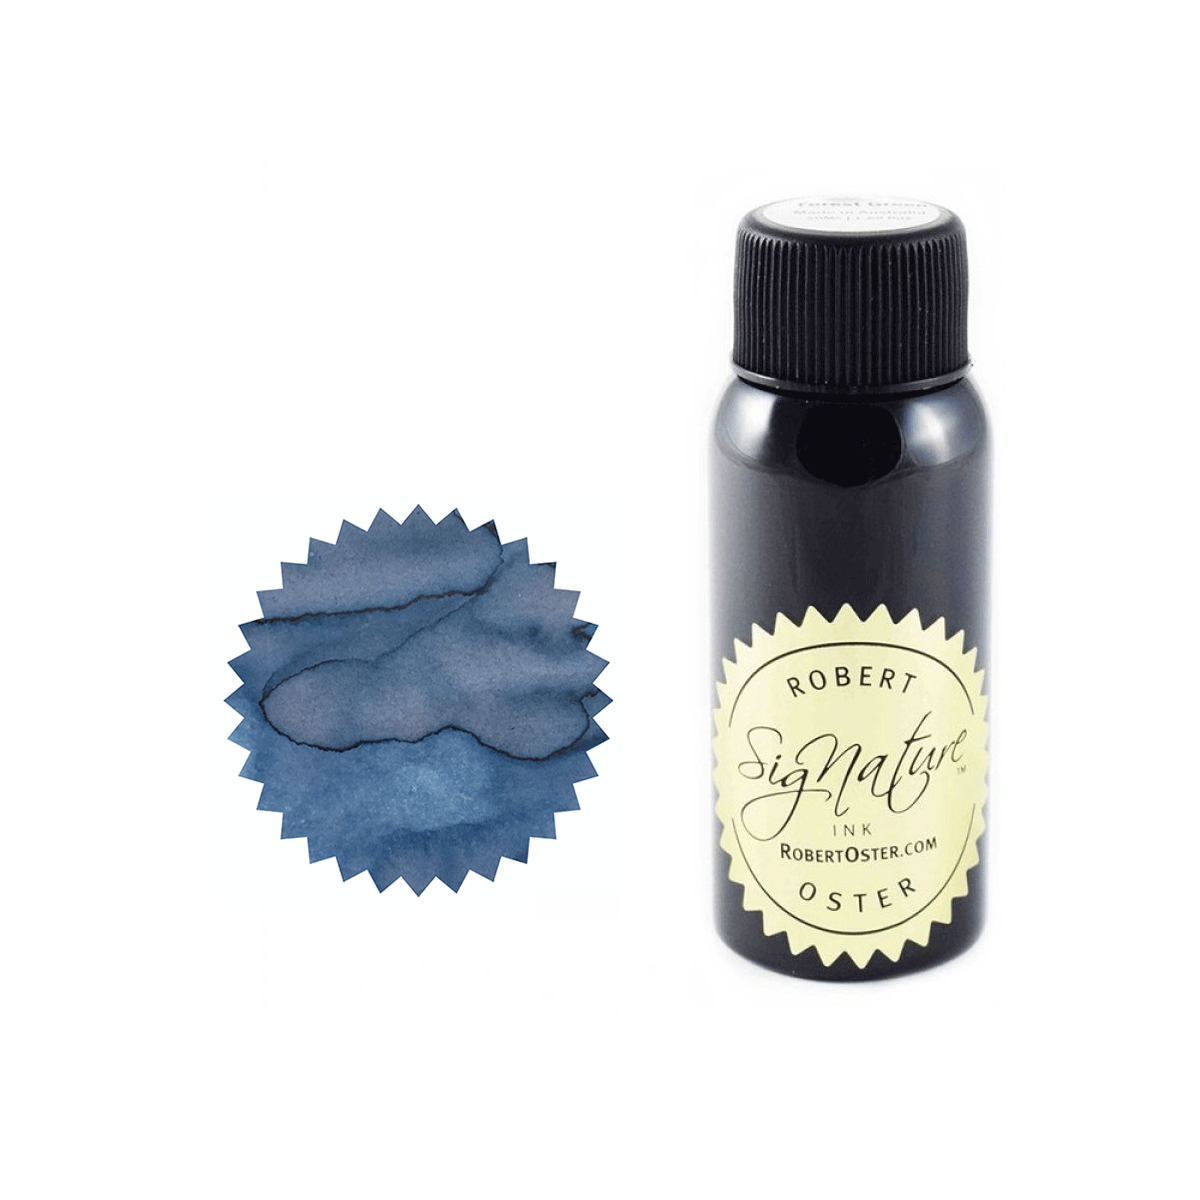 Robert Oster Signature Ink Bottle Grey Seas - Pencraft the boutique